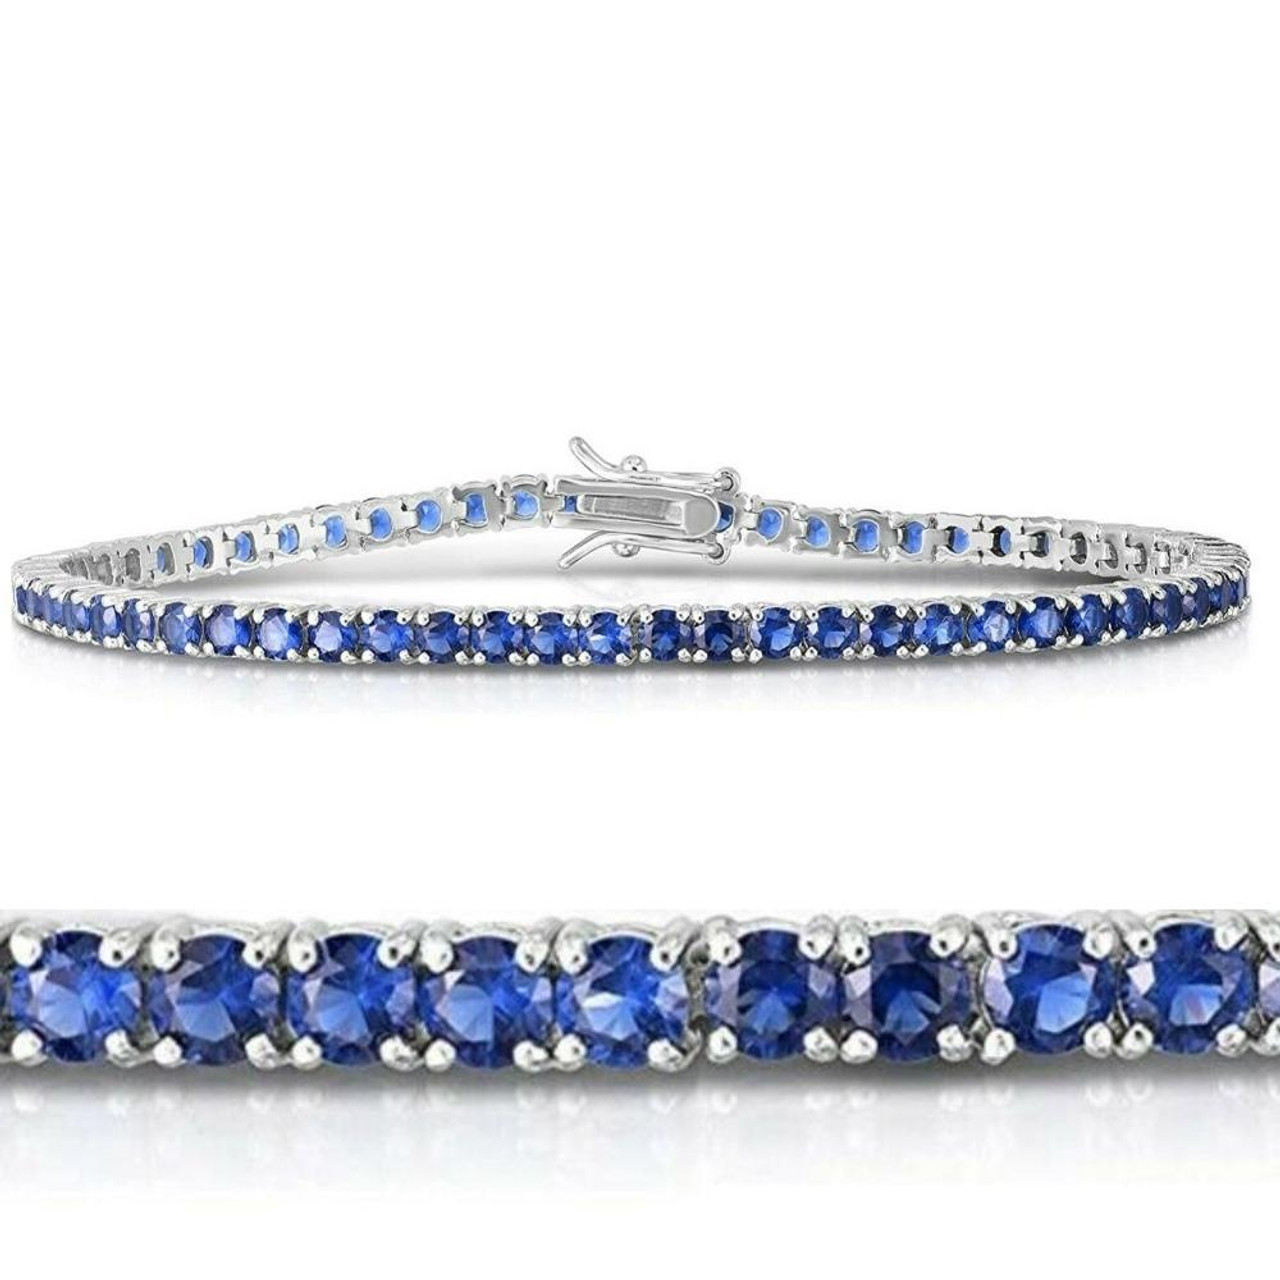 Mens 12 CT TW Enhanced Blue Diamond Bracelet in Black Tungsten and  Stainless Steel  85  Zales Outlet